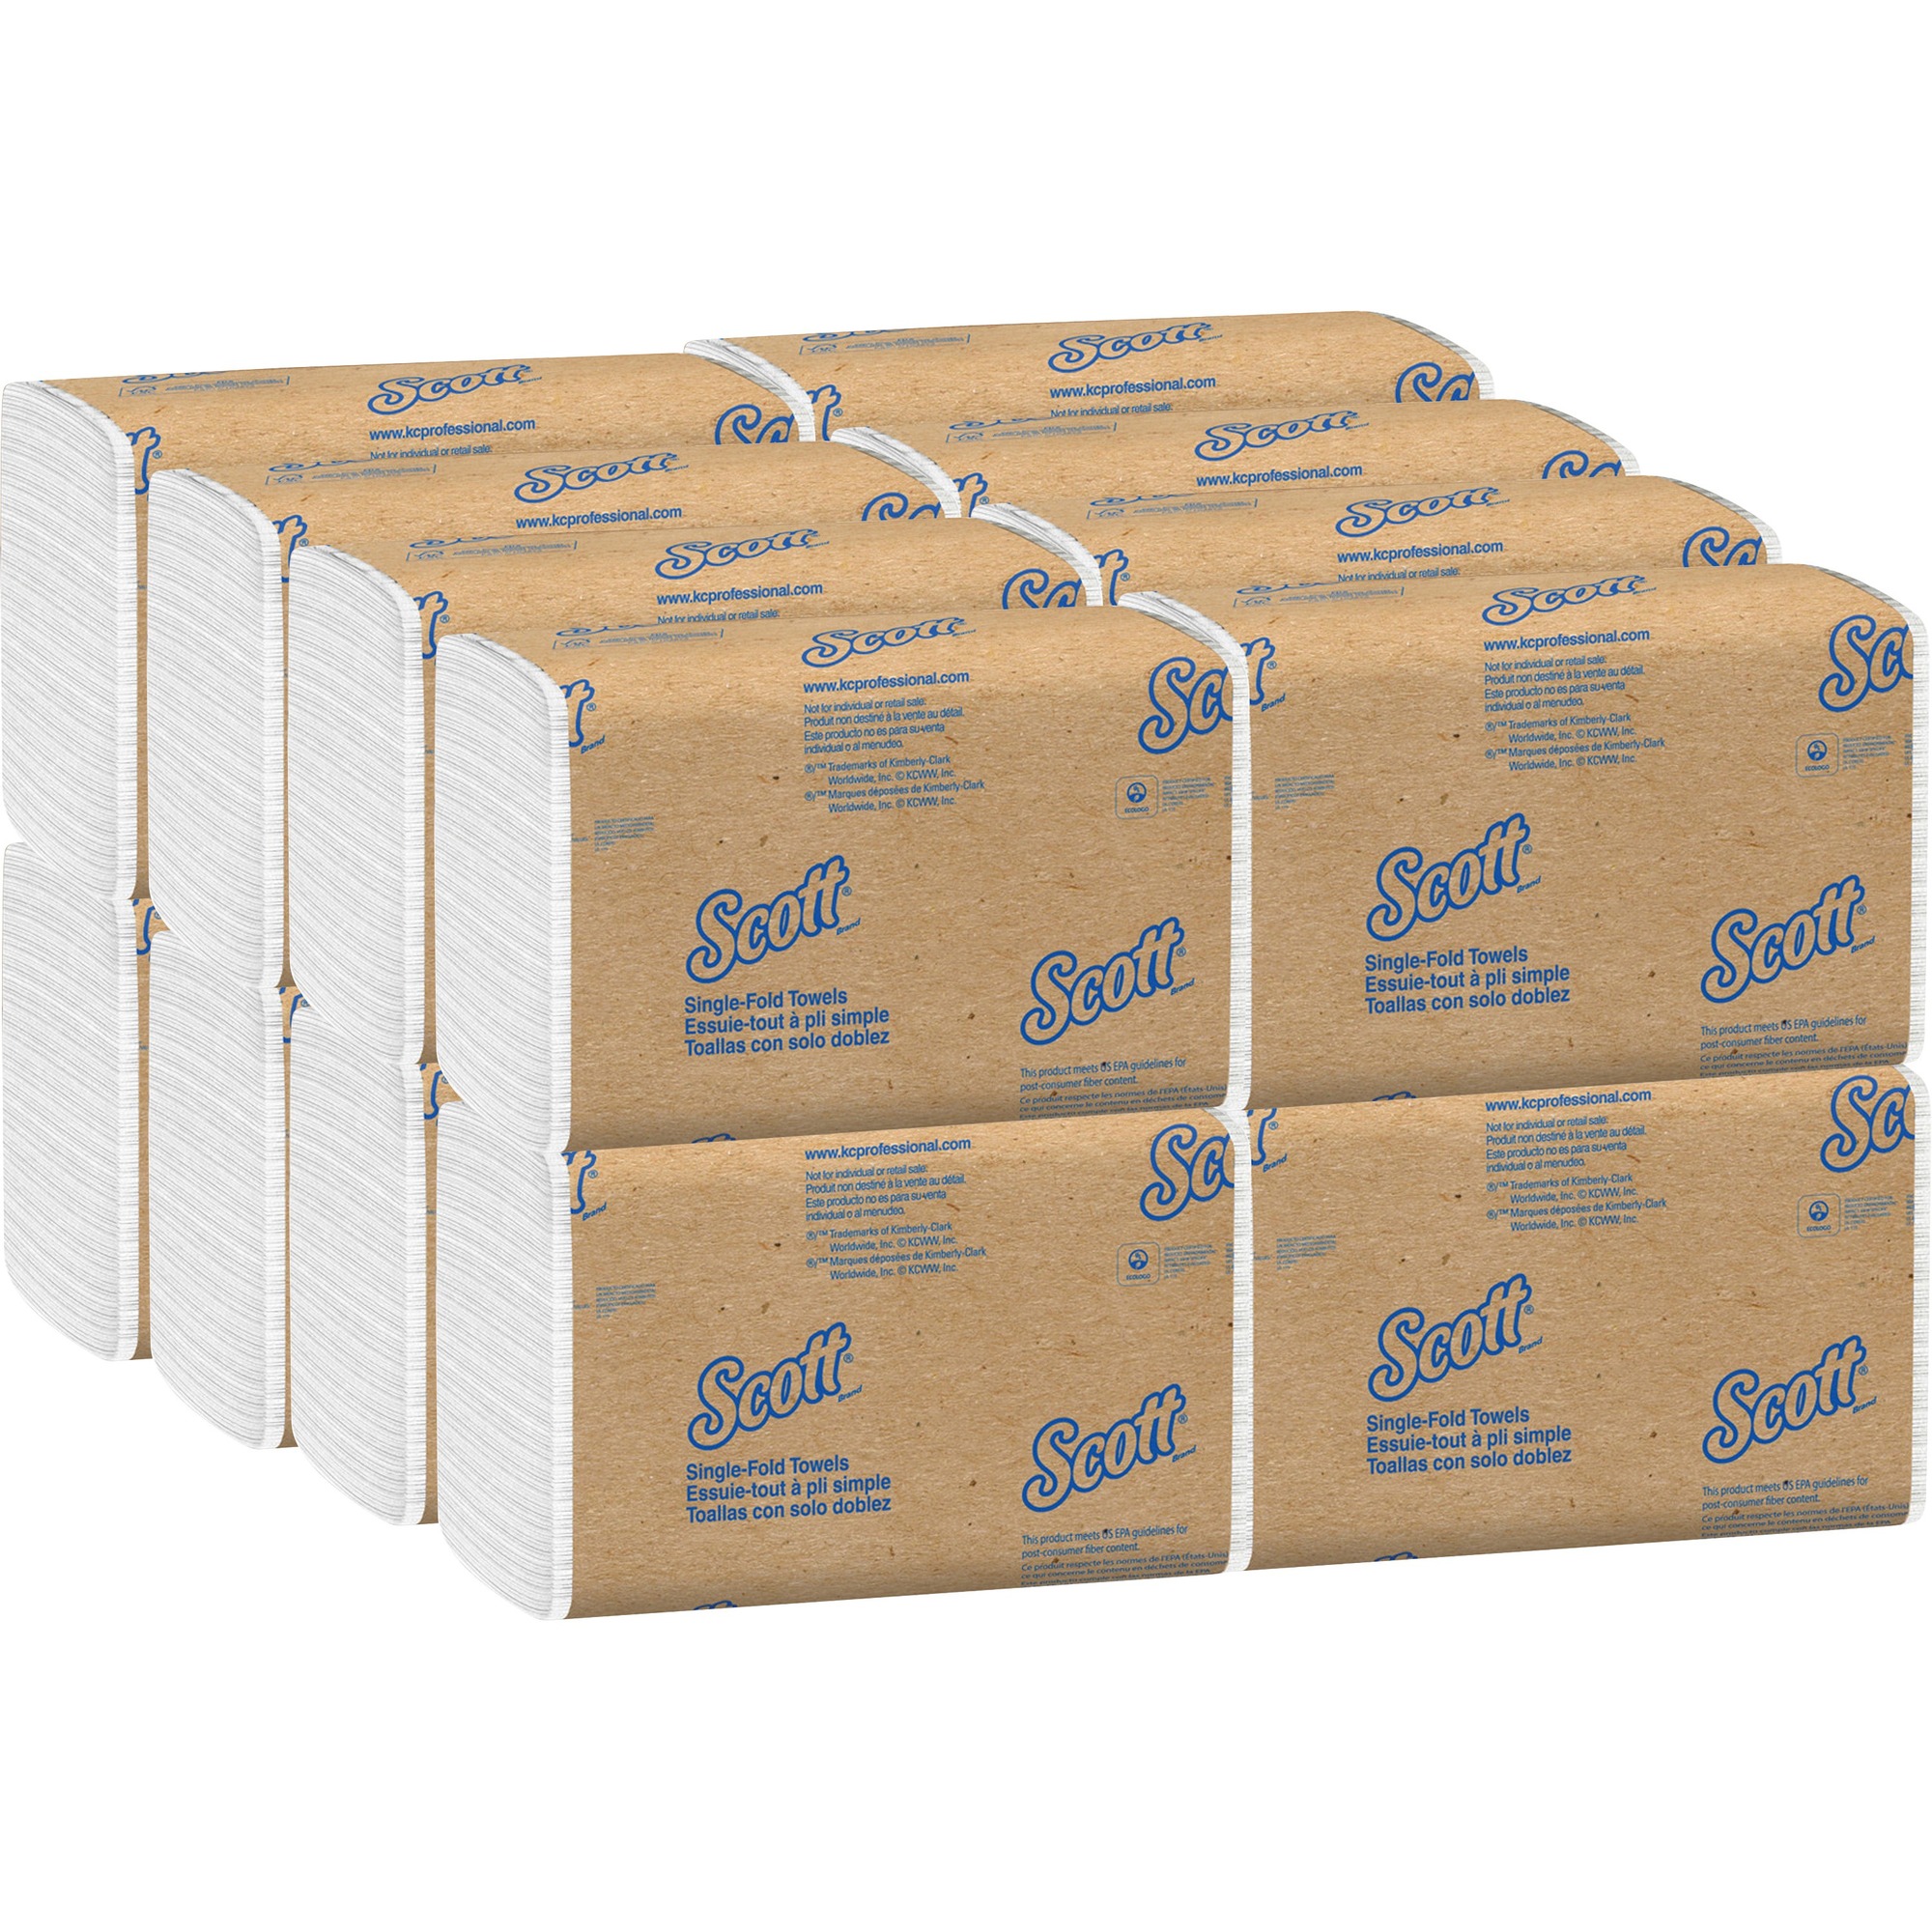 West Coast Office Supplies :: Breakroom :: Cleaning Supplies :: Paper ...